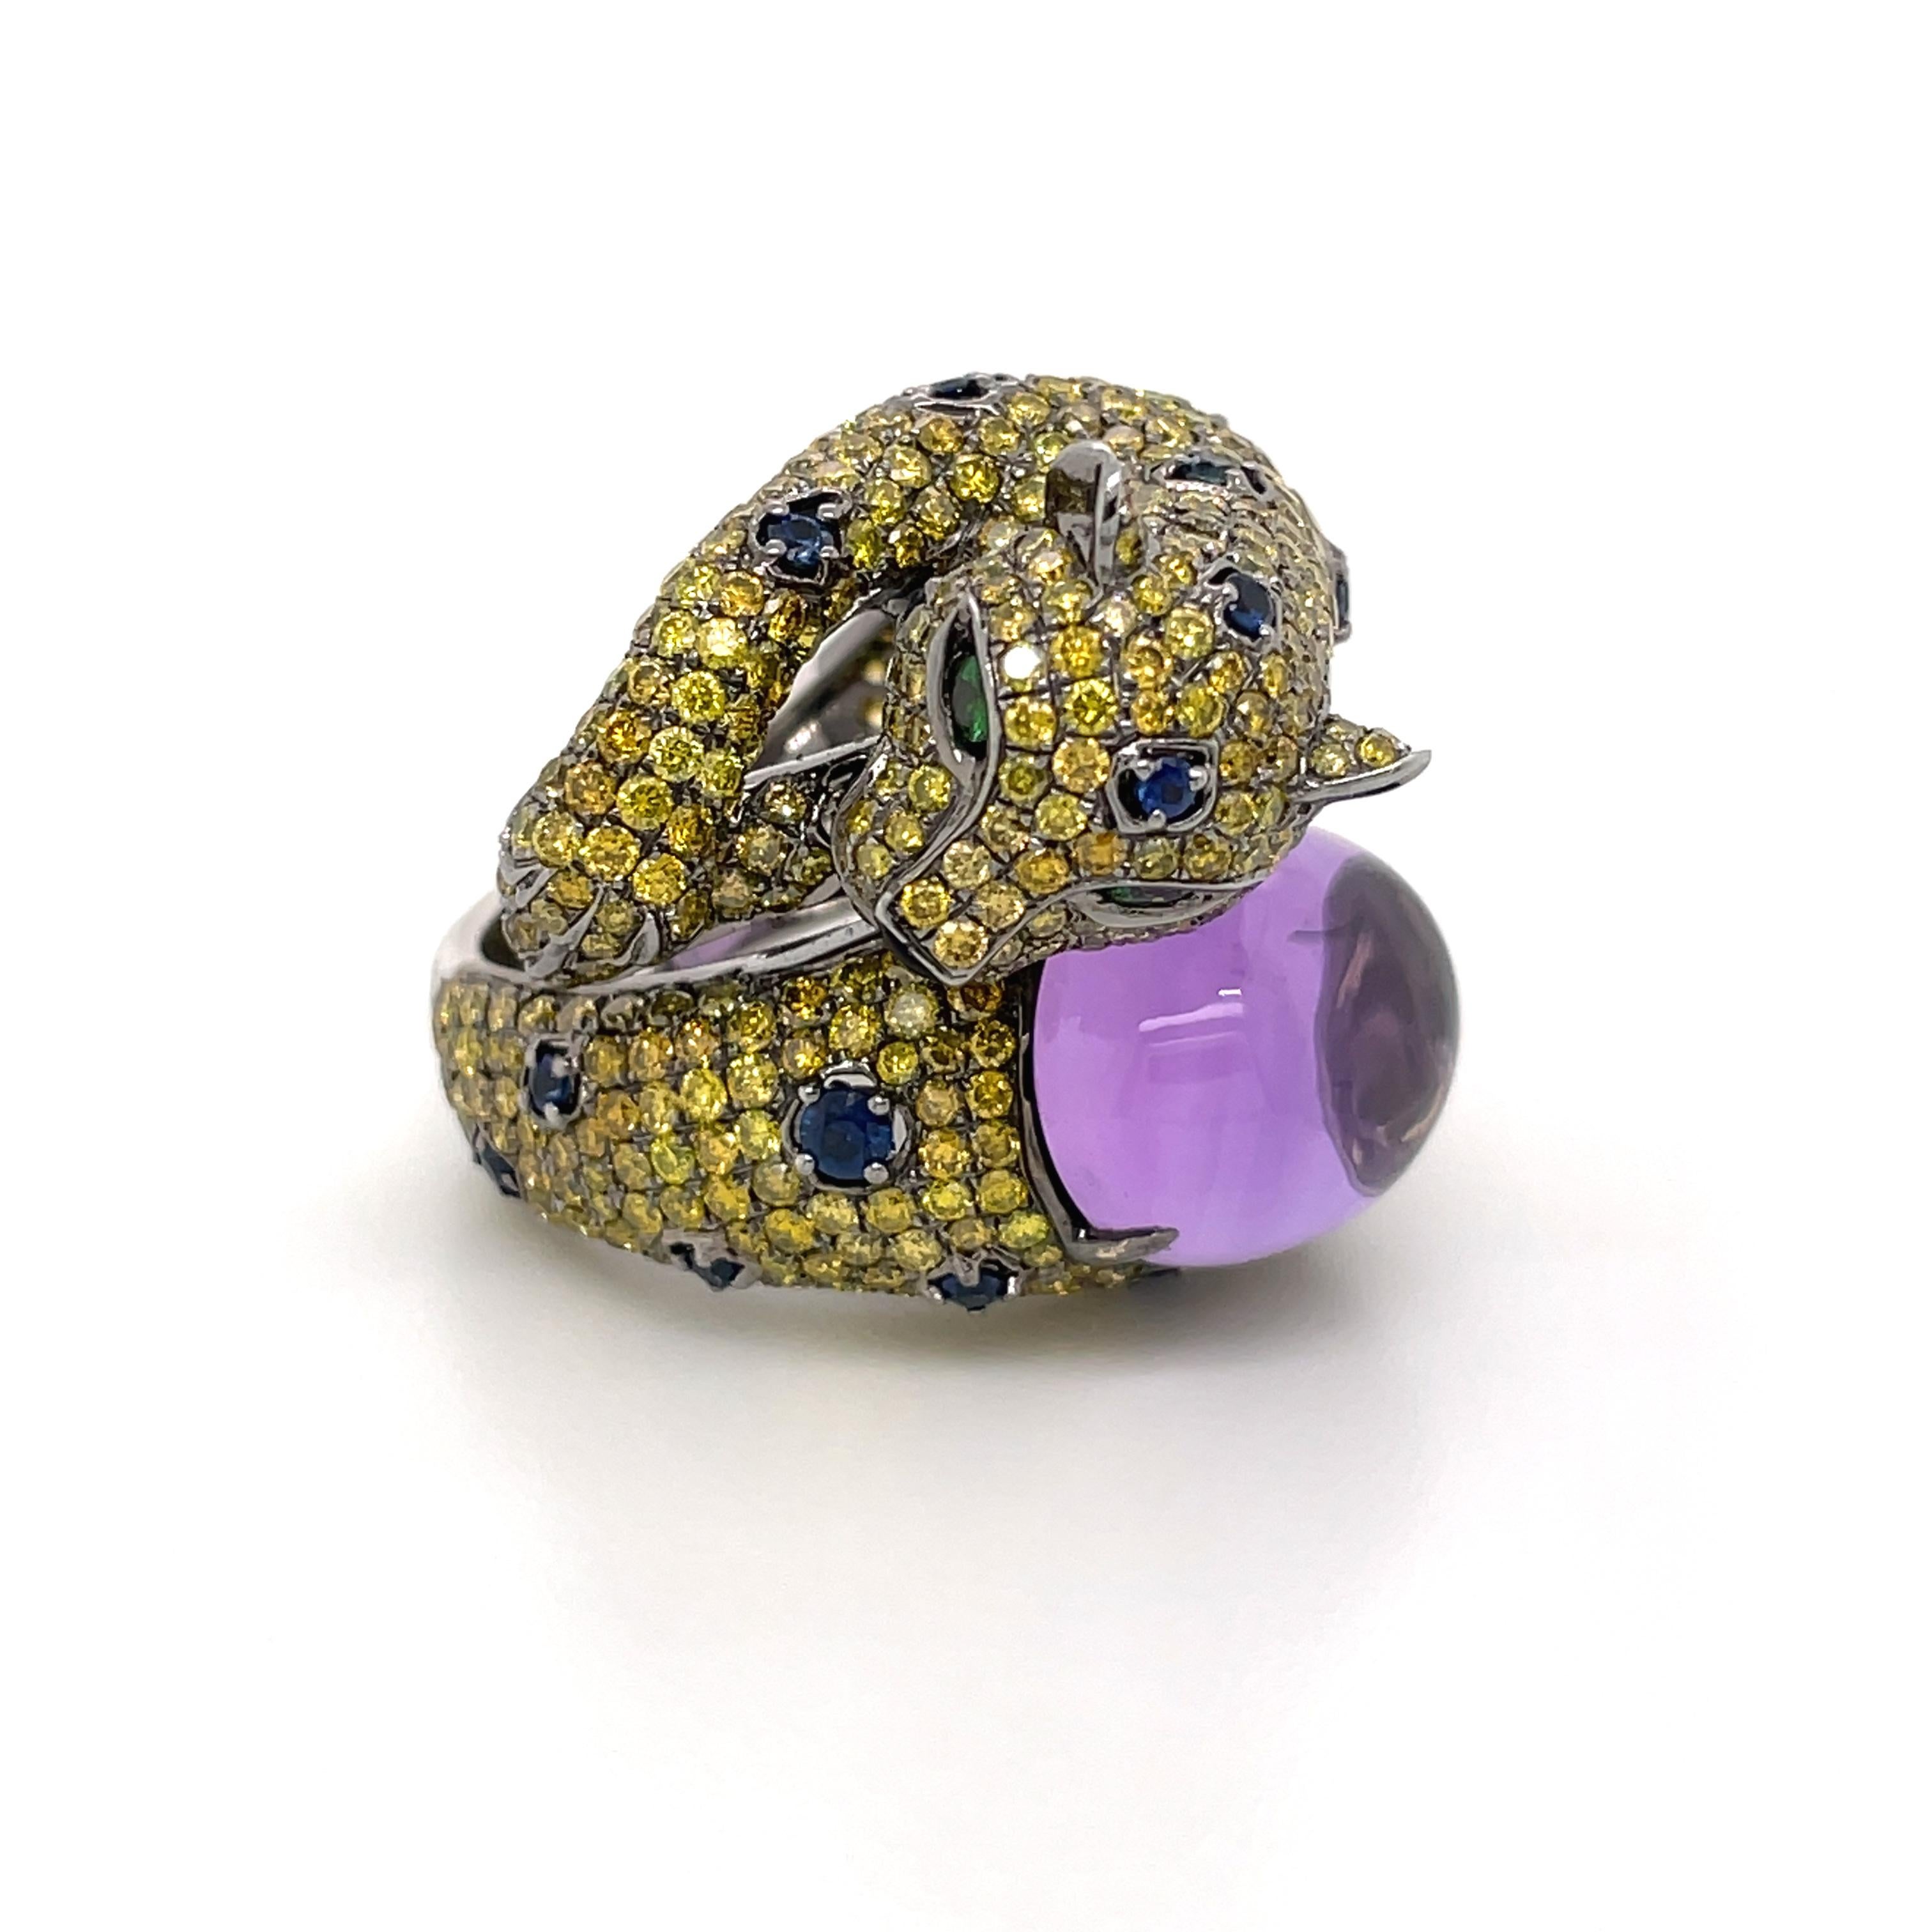 Adorning this magnificent cheetah ring is a regal fusion of elegance and strength. At its heart, a mesmerizing amethyst stone gleams with a deep, enchanting hue that exudes calm and spiritual energy. Surrounding this gem, a fierce cheetah crafted